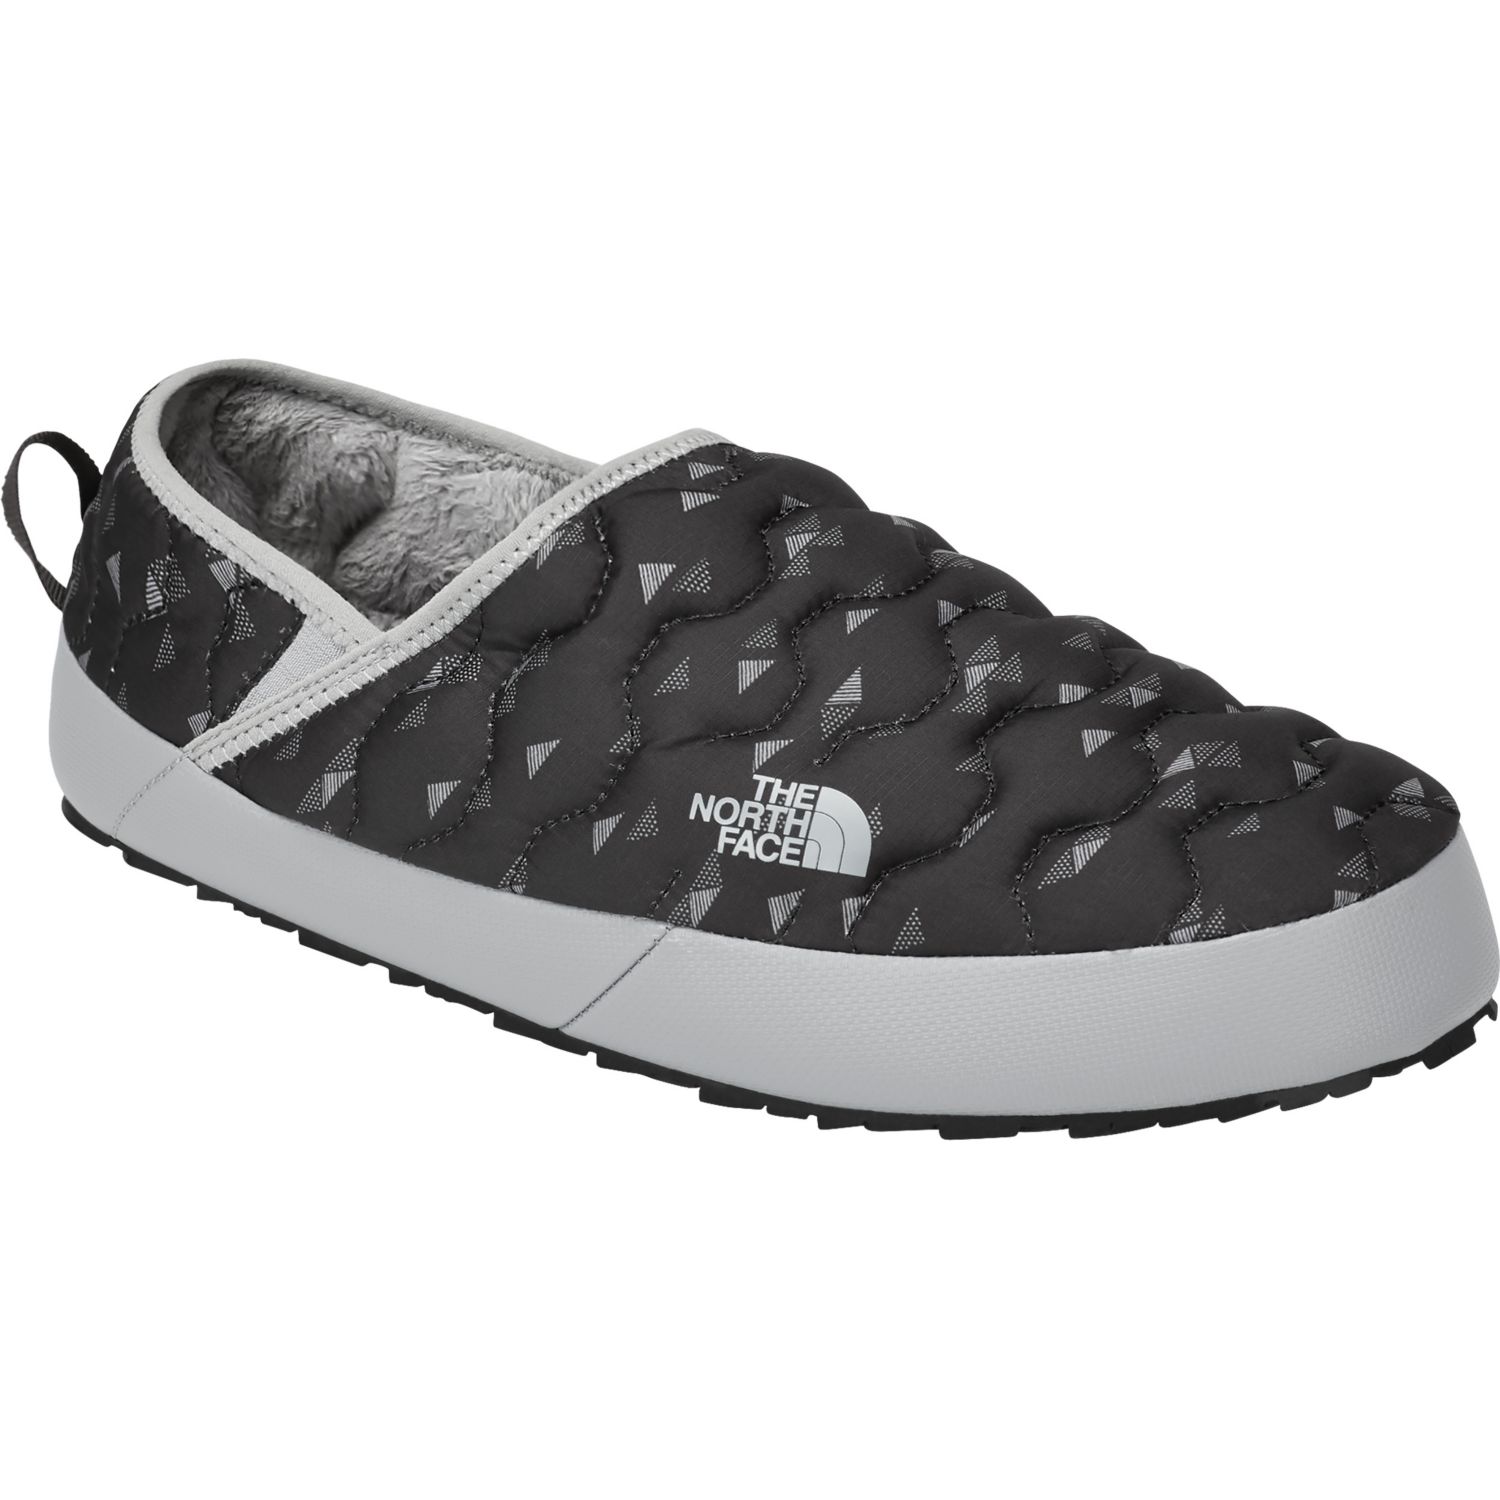 the north face men's thermoball traction mule iv